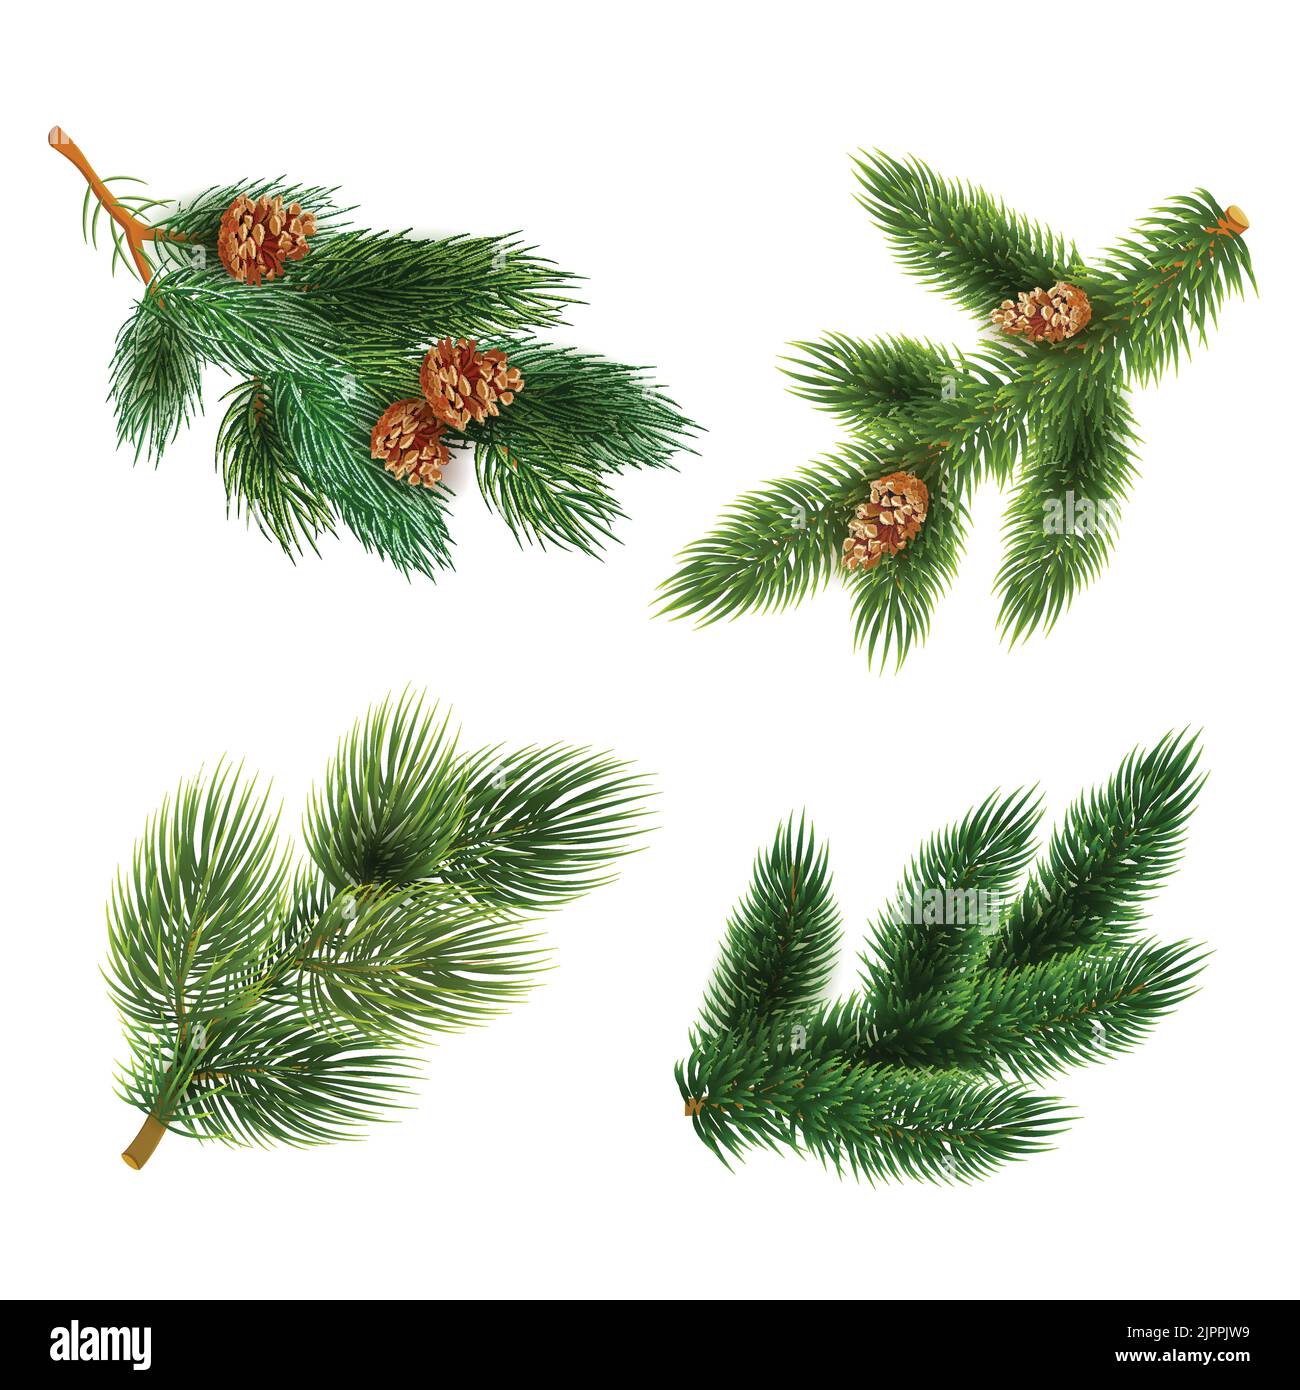 Pine tree branches with cones for chrismas decorations 4  icons set composition banner realistic abstract vector illustration Stock Vector